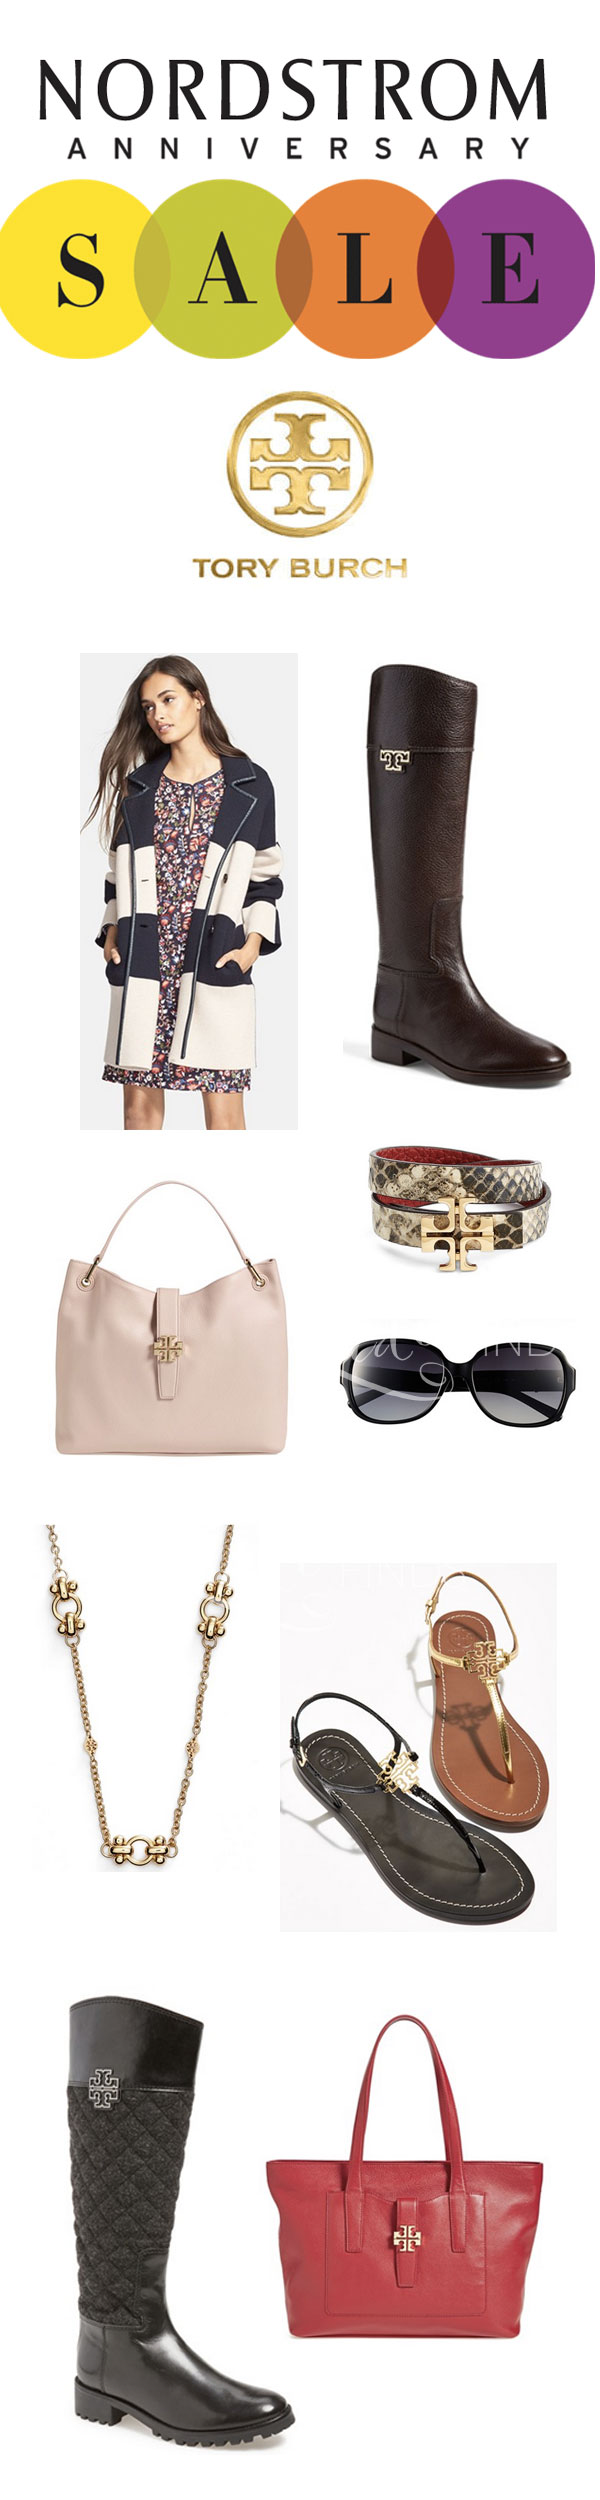 Style Guide: Nordstrom Anniversary Sale - Tory Burch